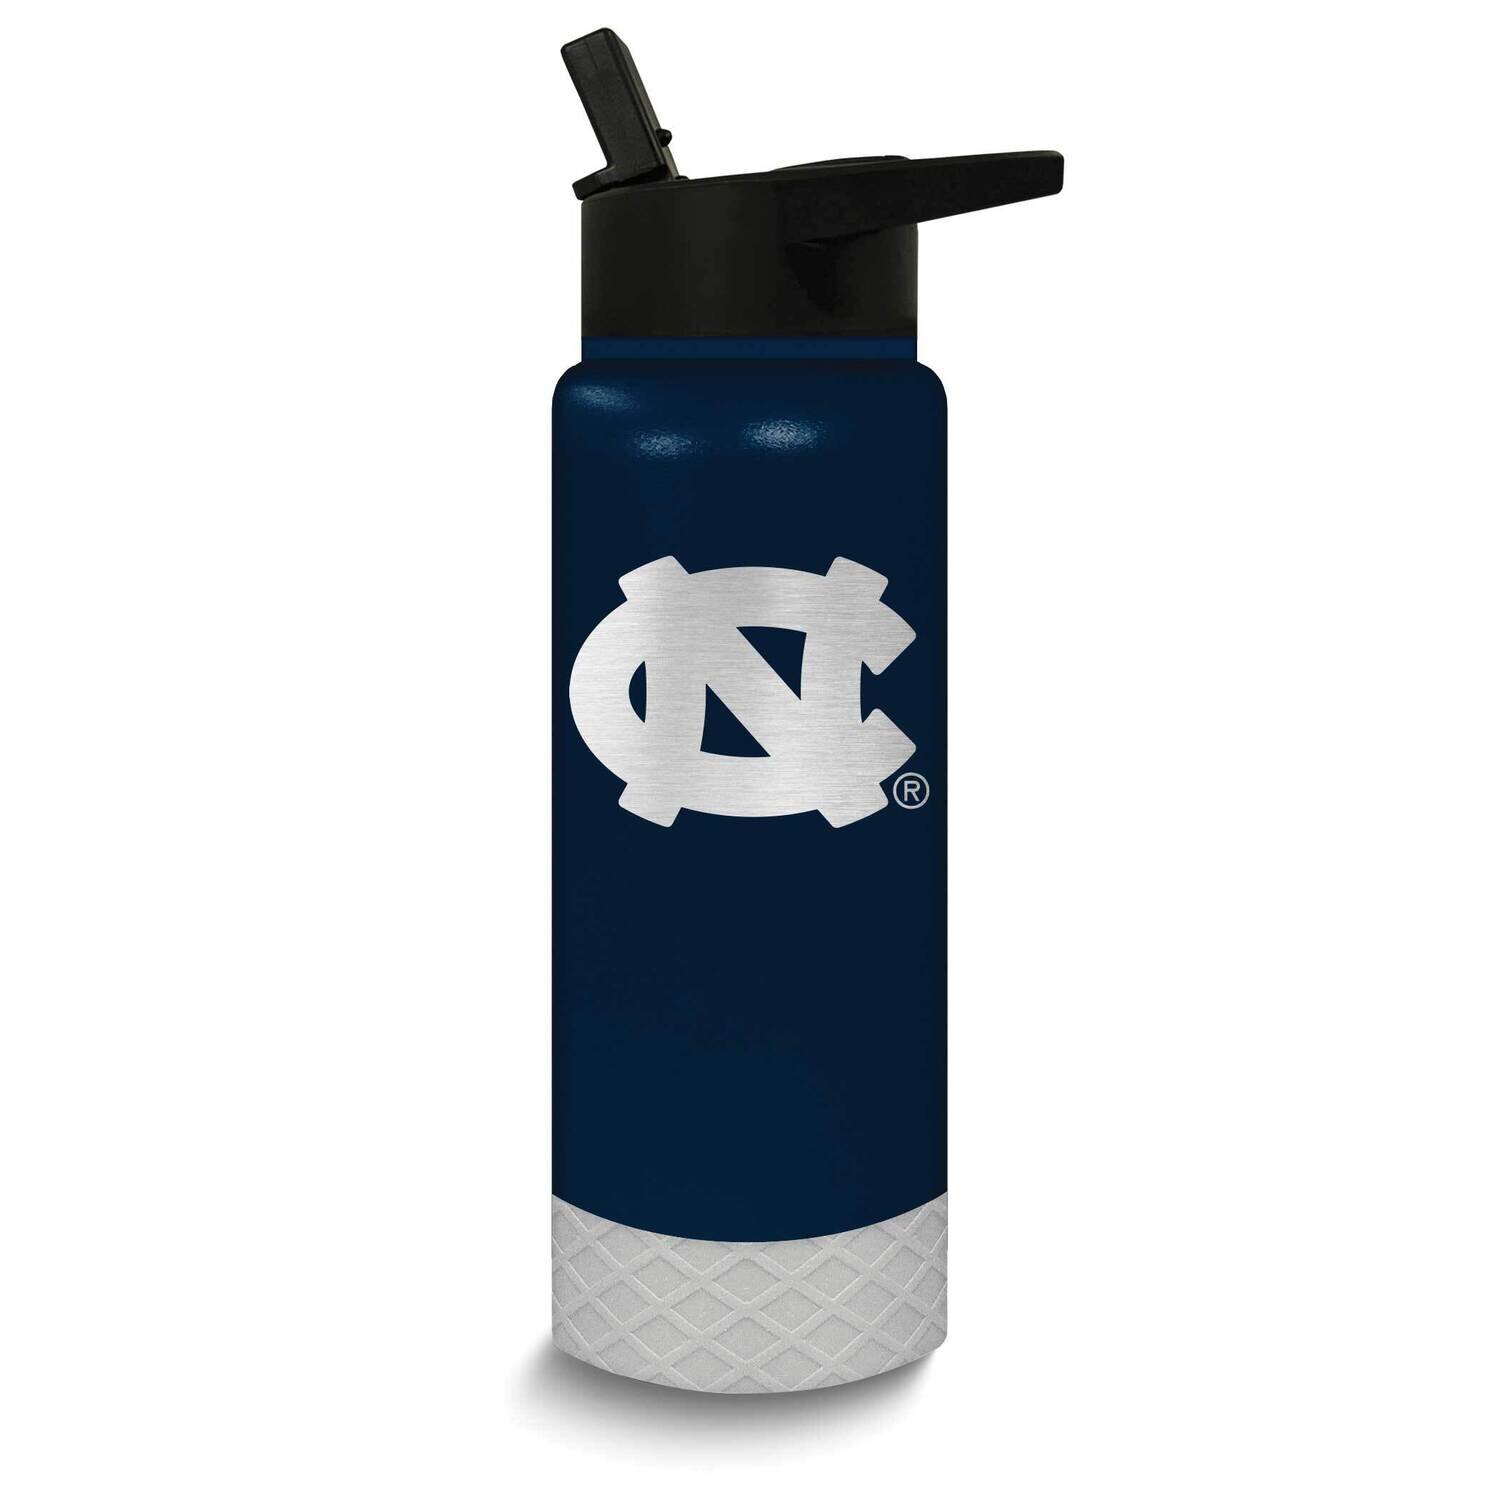 Collegiate Univeristy of North Carolina Stainless JR Water Bottle GM26111-UNC